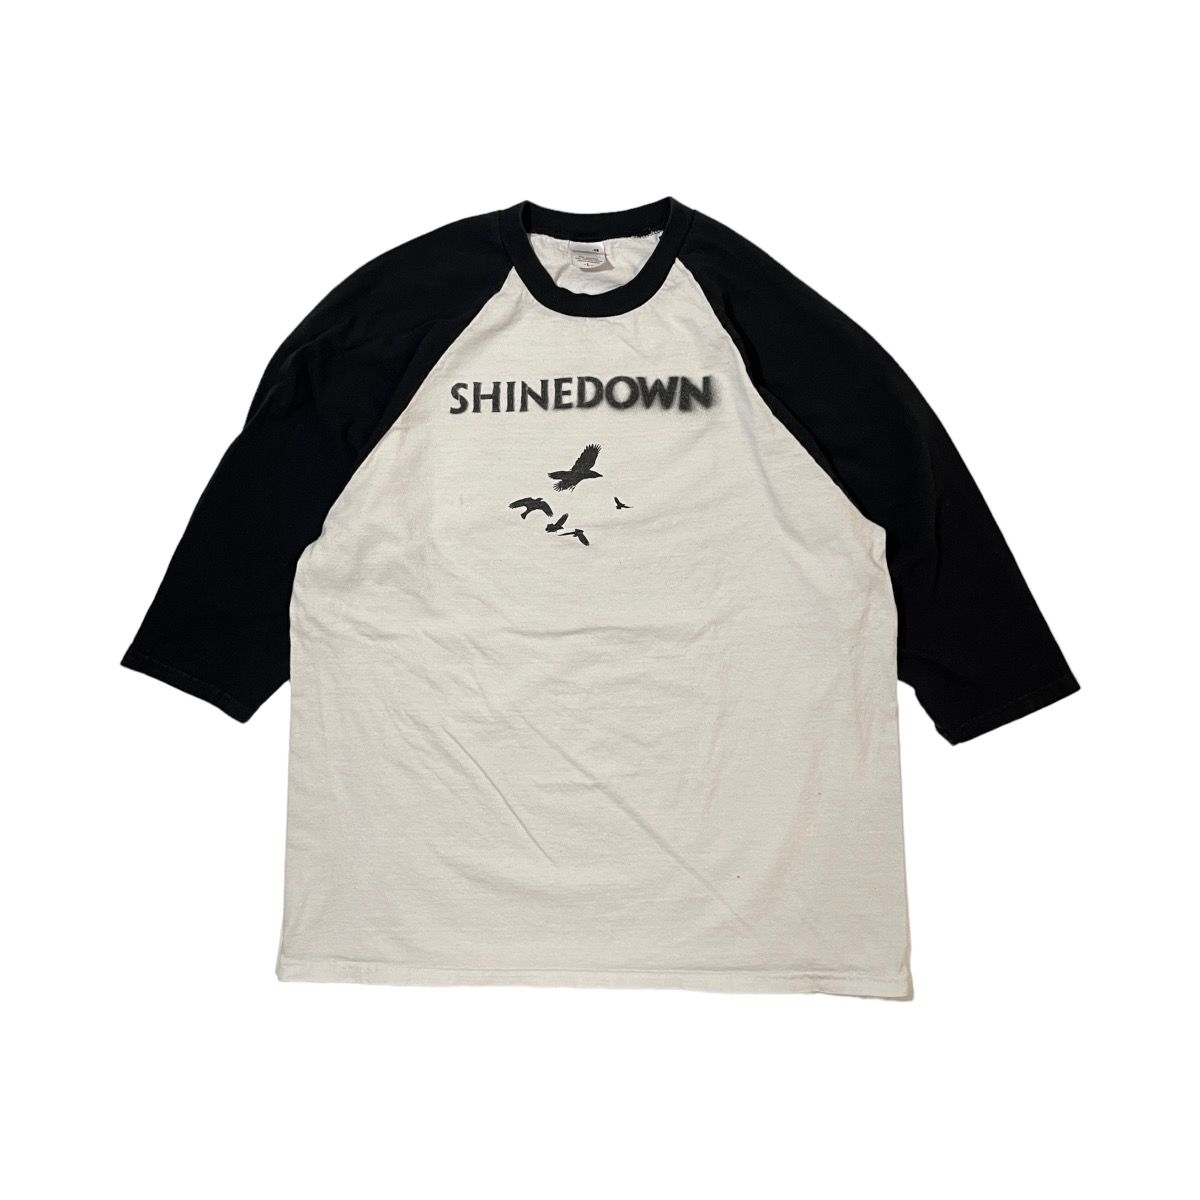 Vintage 2008 Shinedown Sound of Madness Tee Size US L / EU 52-54 / 3 - 1 Preview